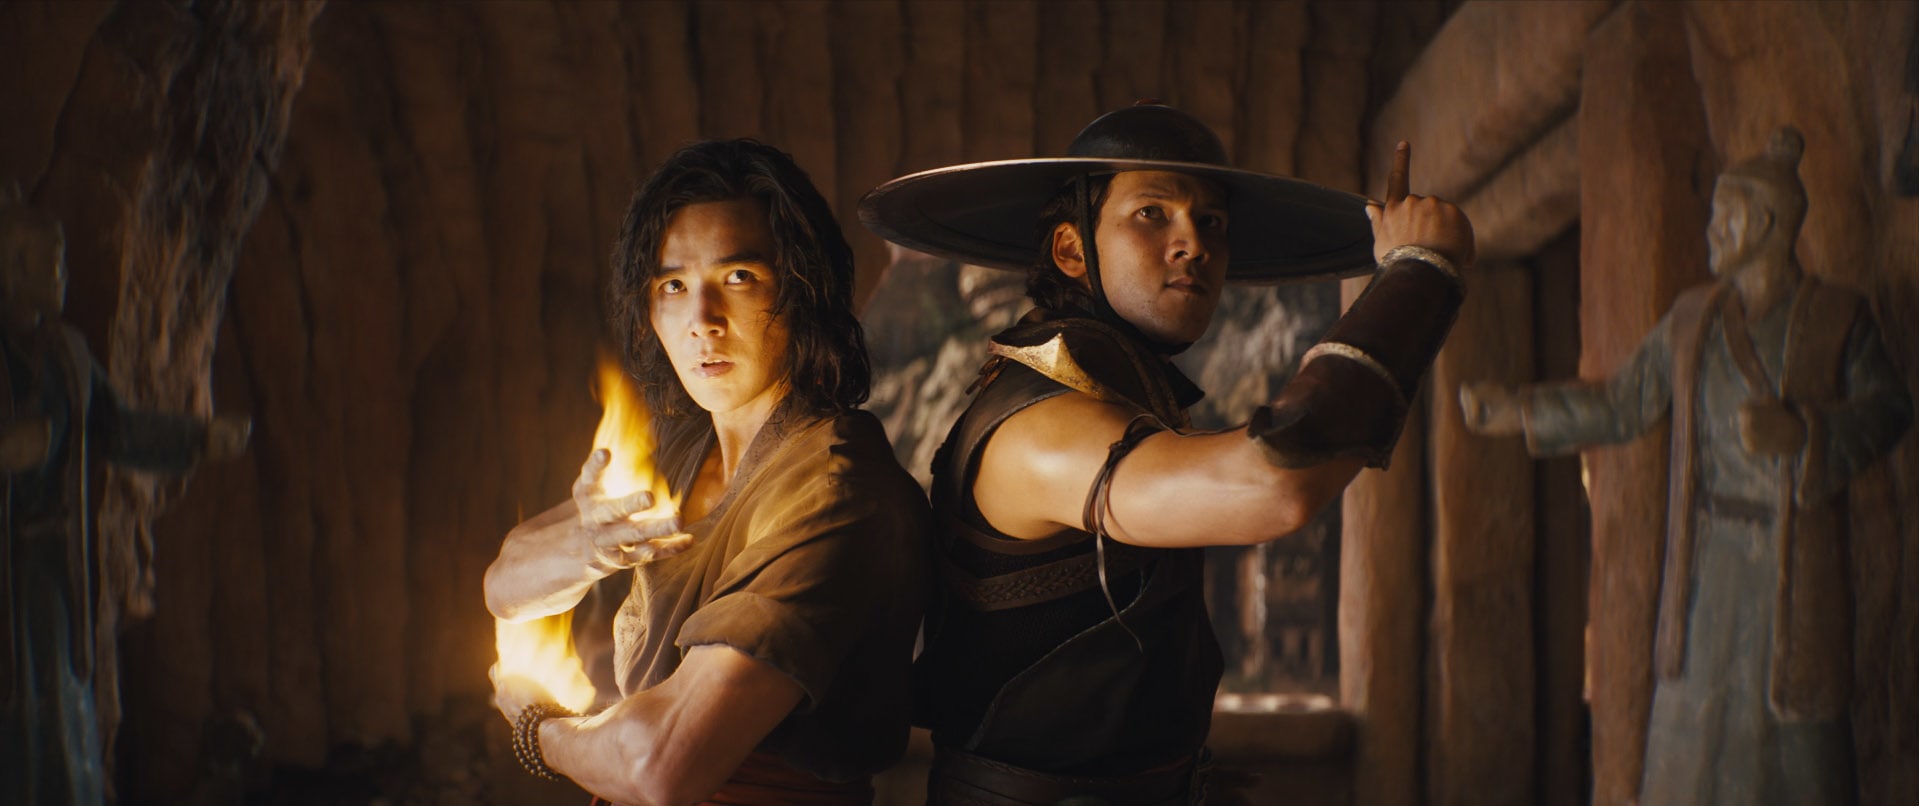 First Look: The Live-Action Mortal Kombat Reboot Promises R-Rated Fatalities